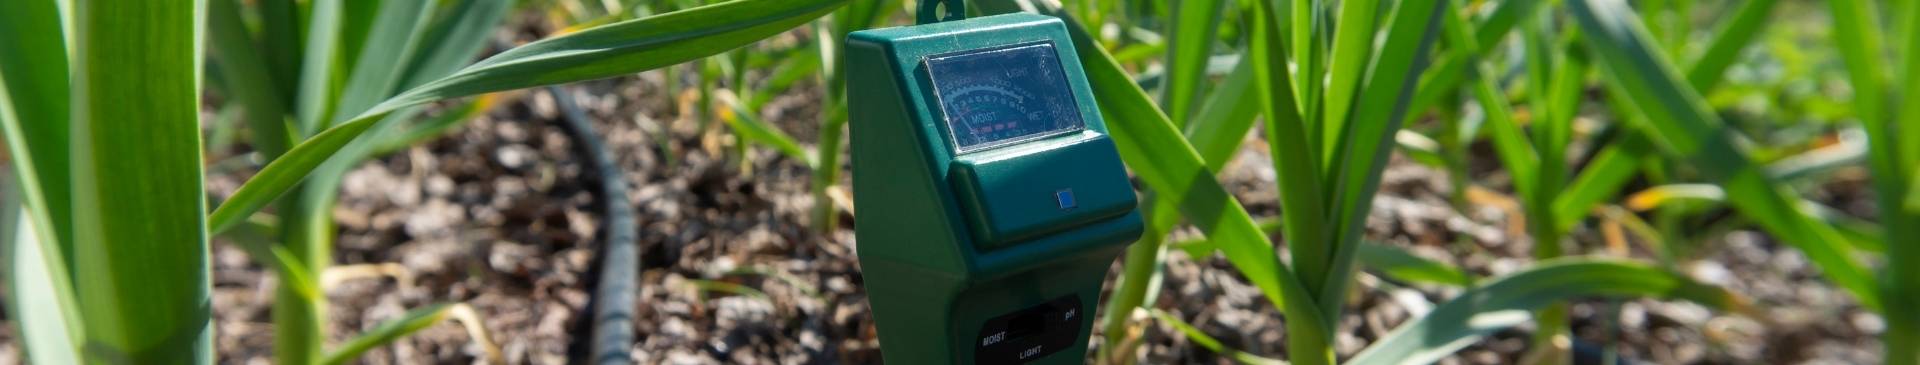 How Soil Moisture Meters Can Help Your Gardening